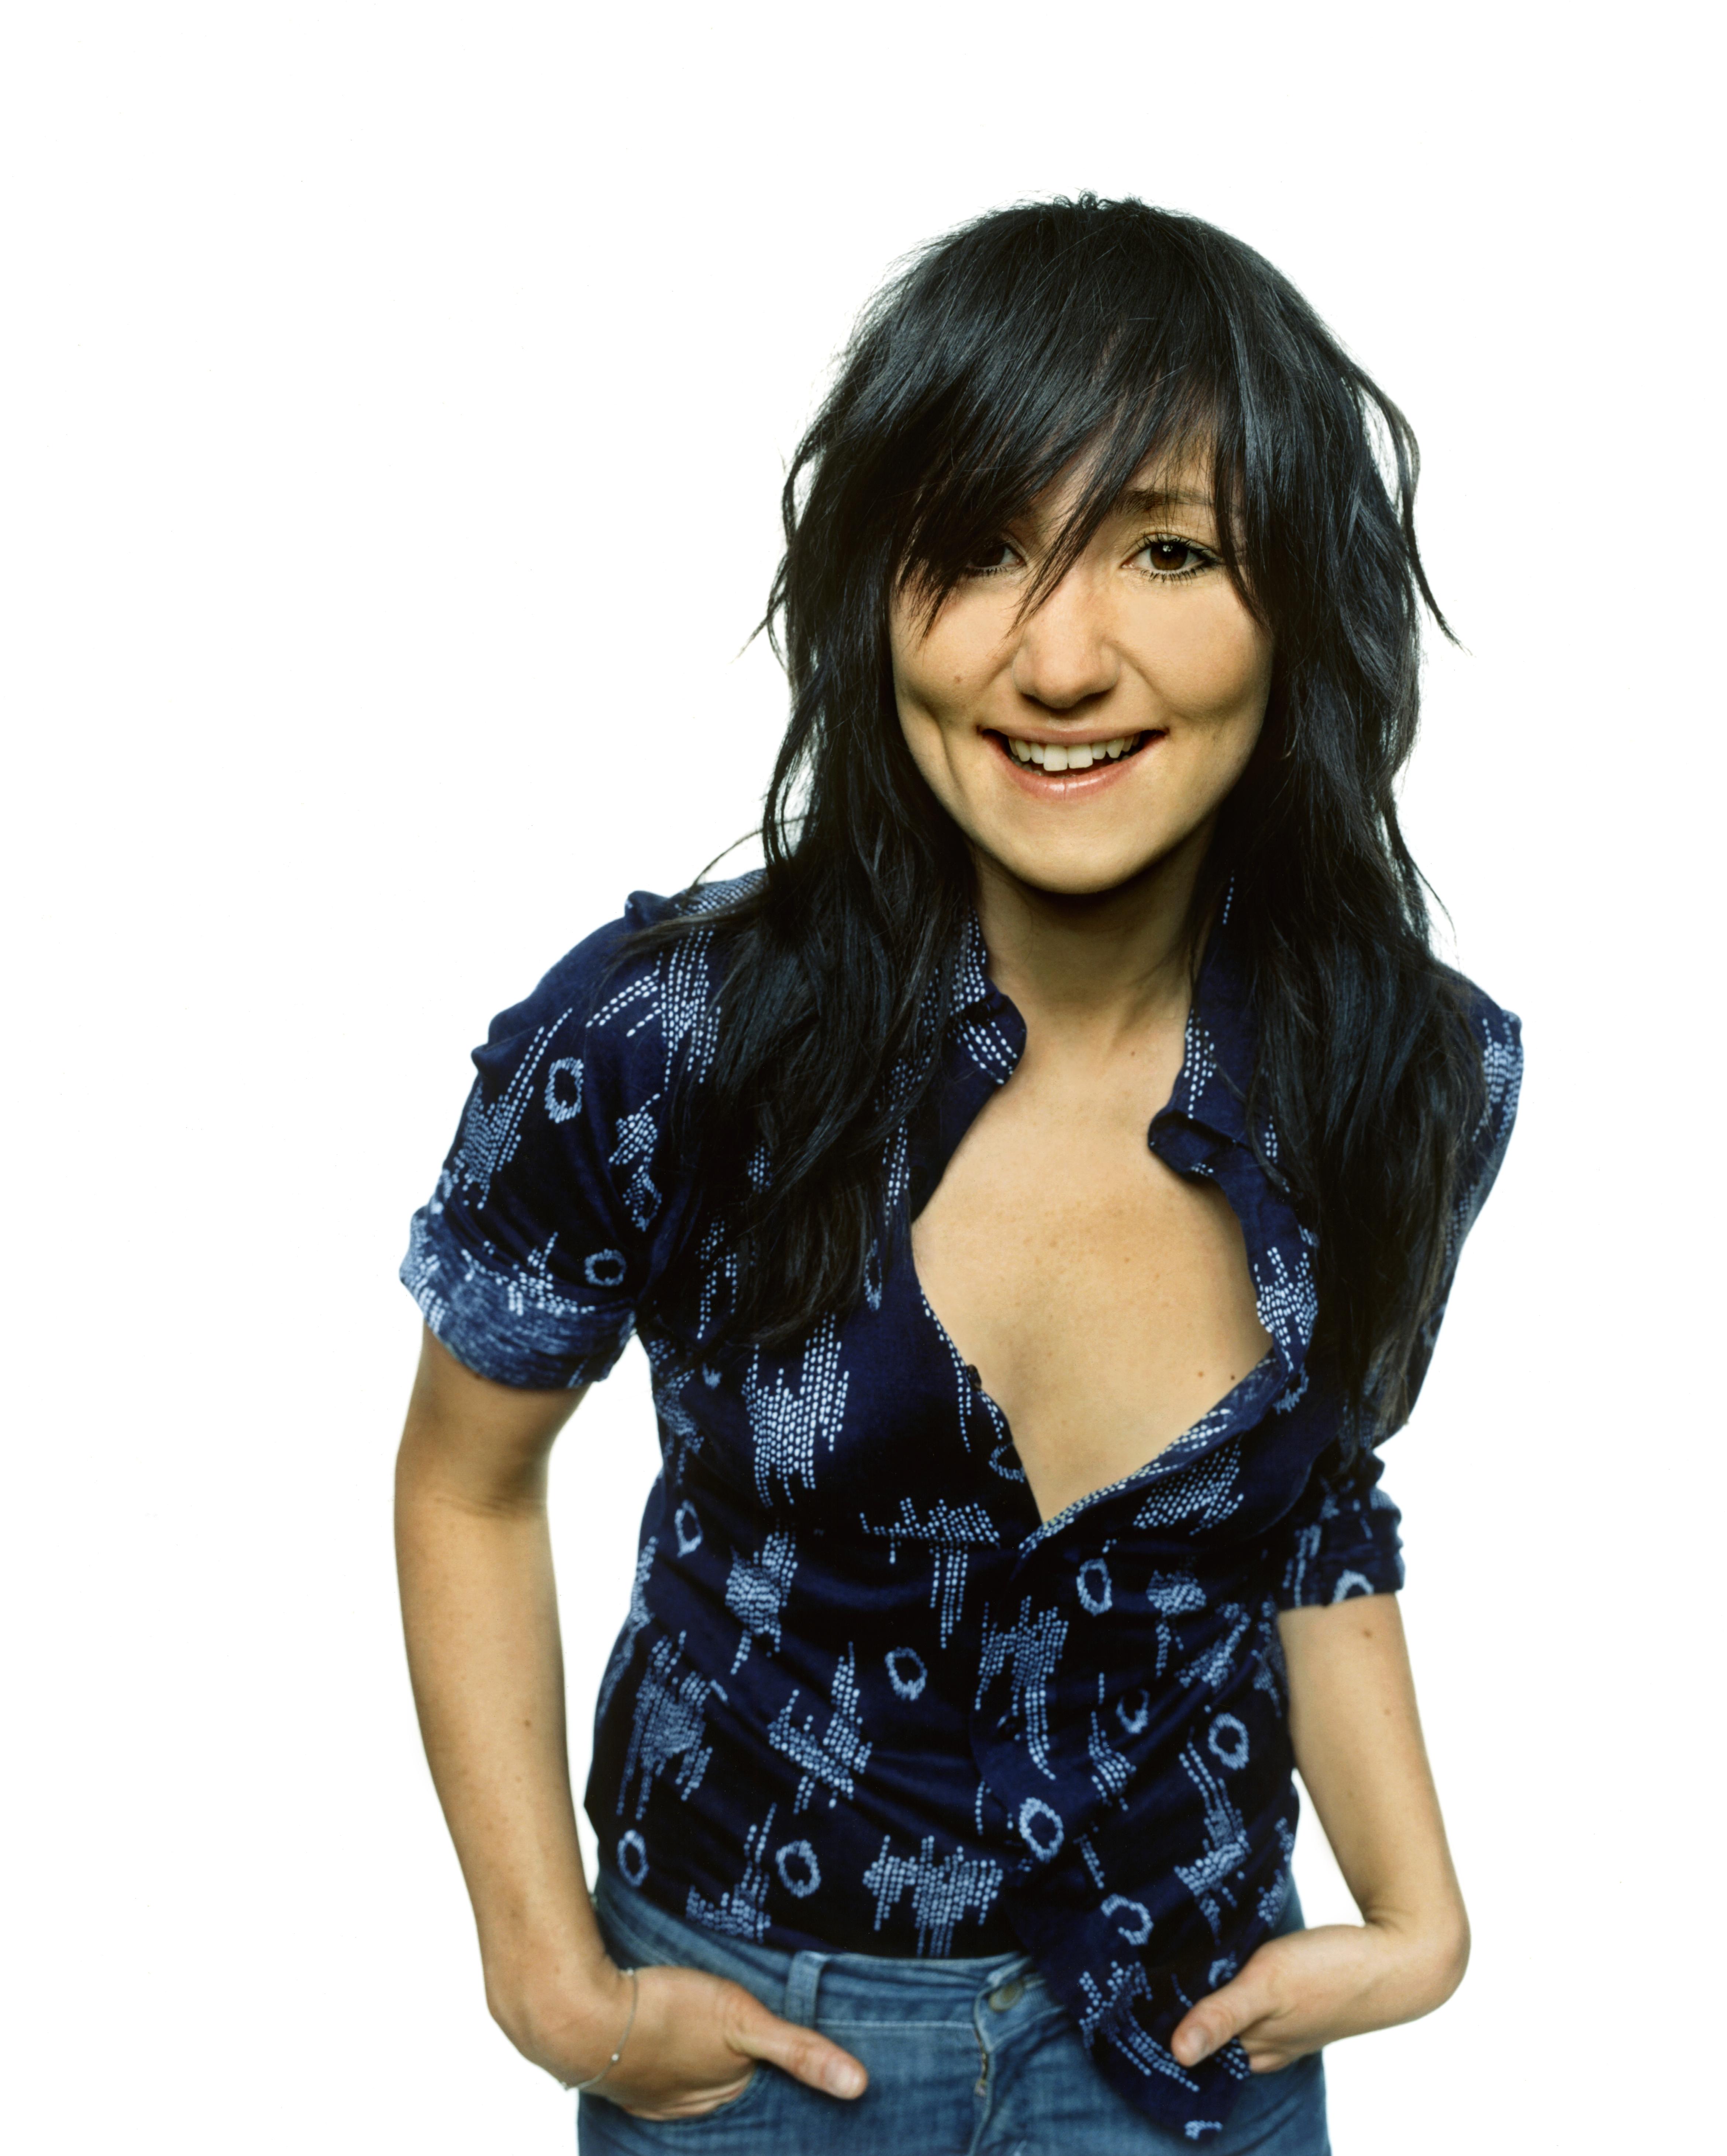 KT Tunstall Backgrounds, Compatible - PC, Mobile, Gadgets| 4680x5844 px